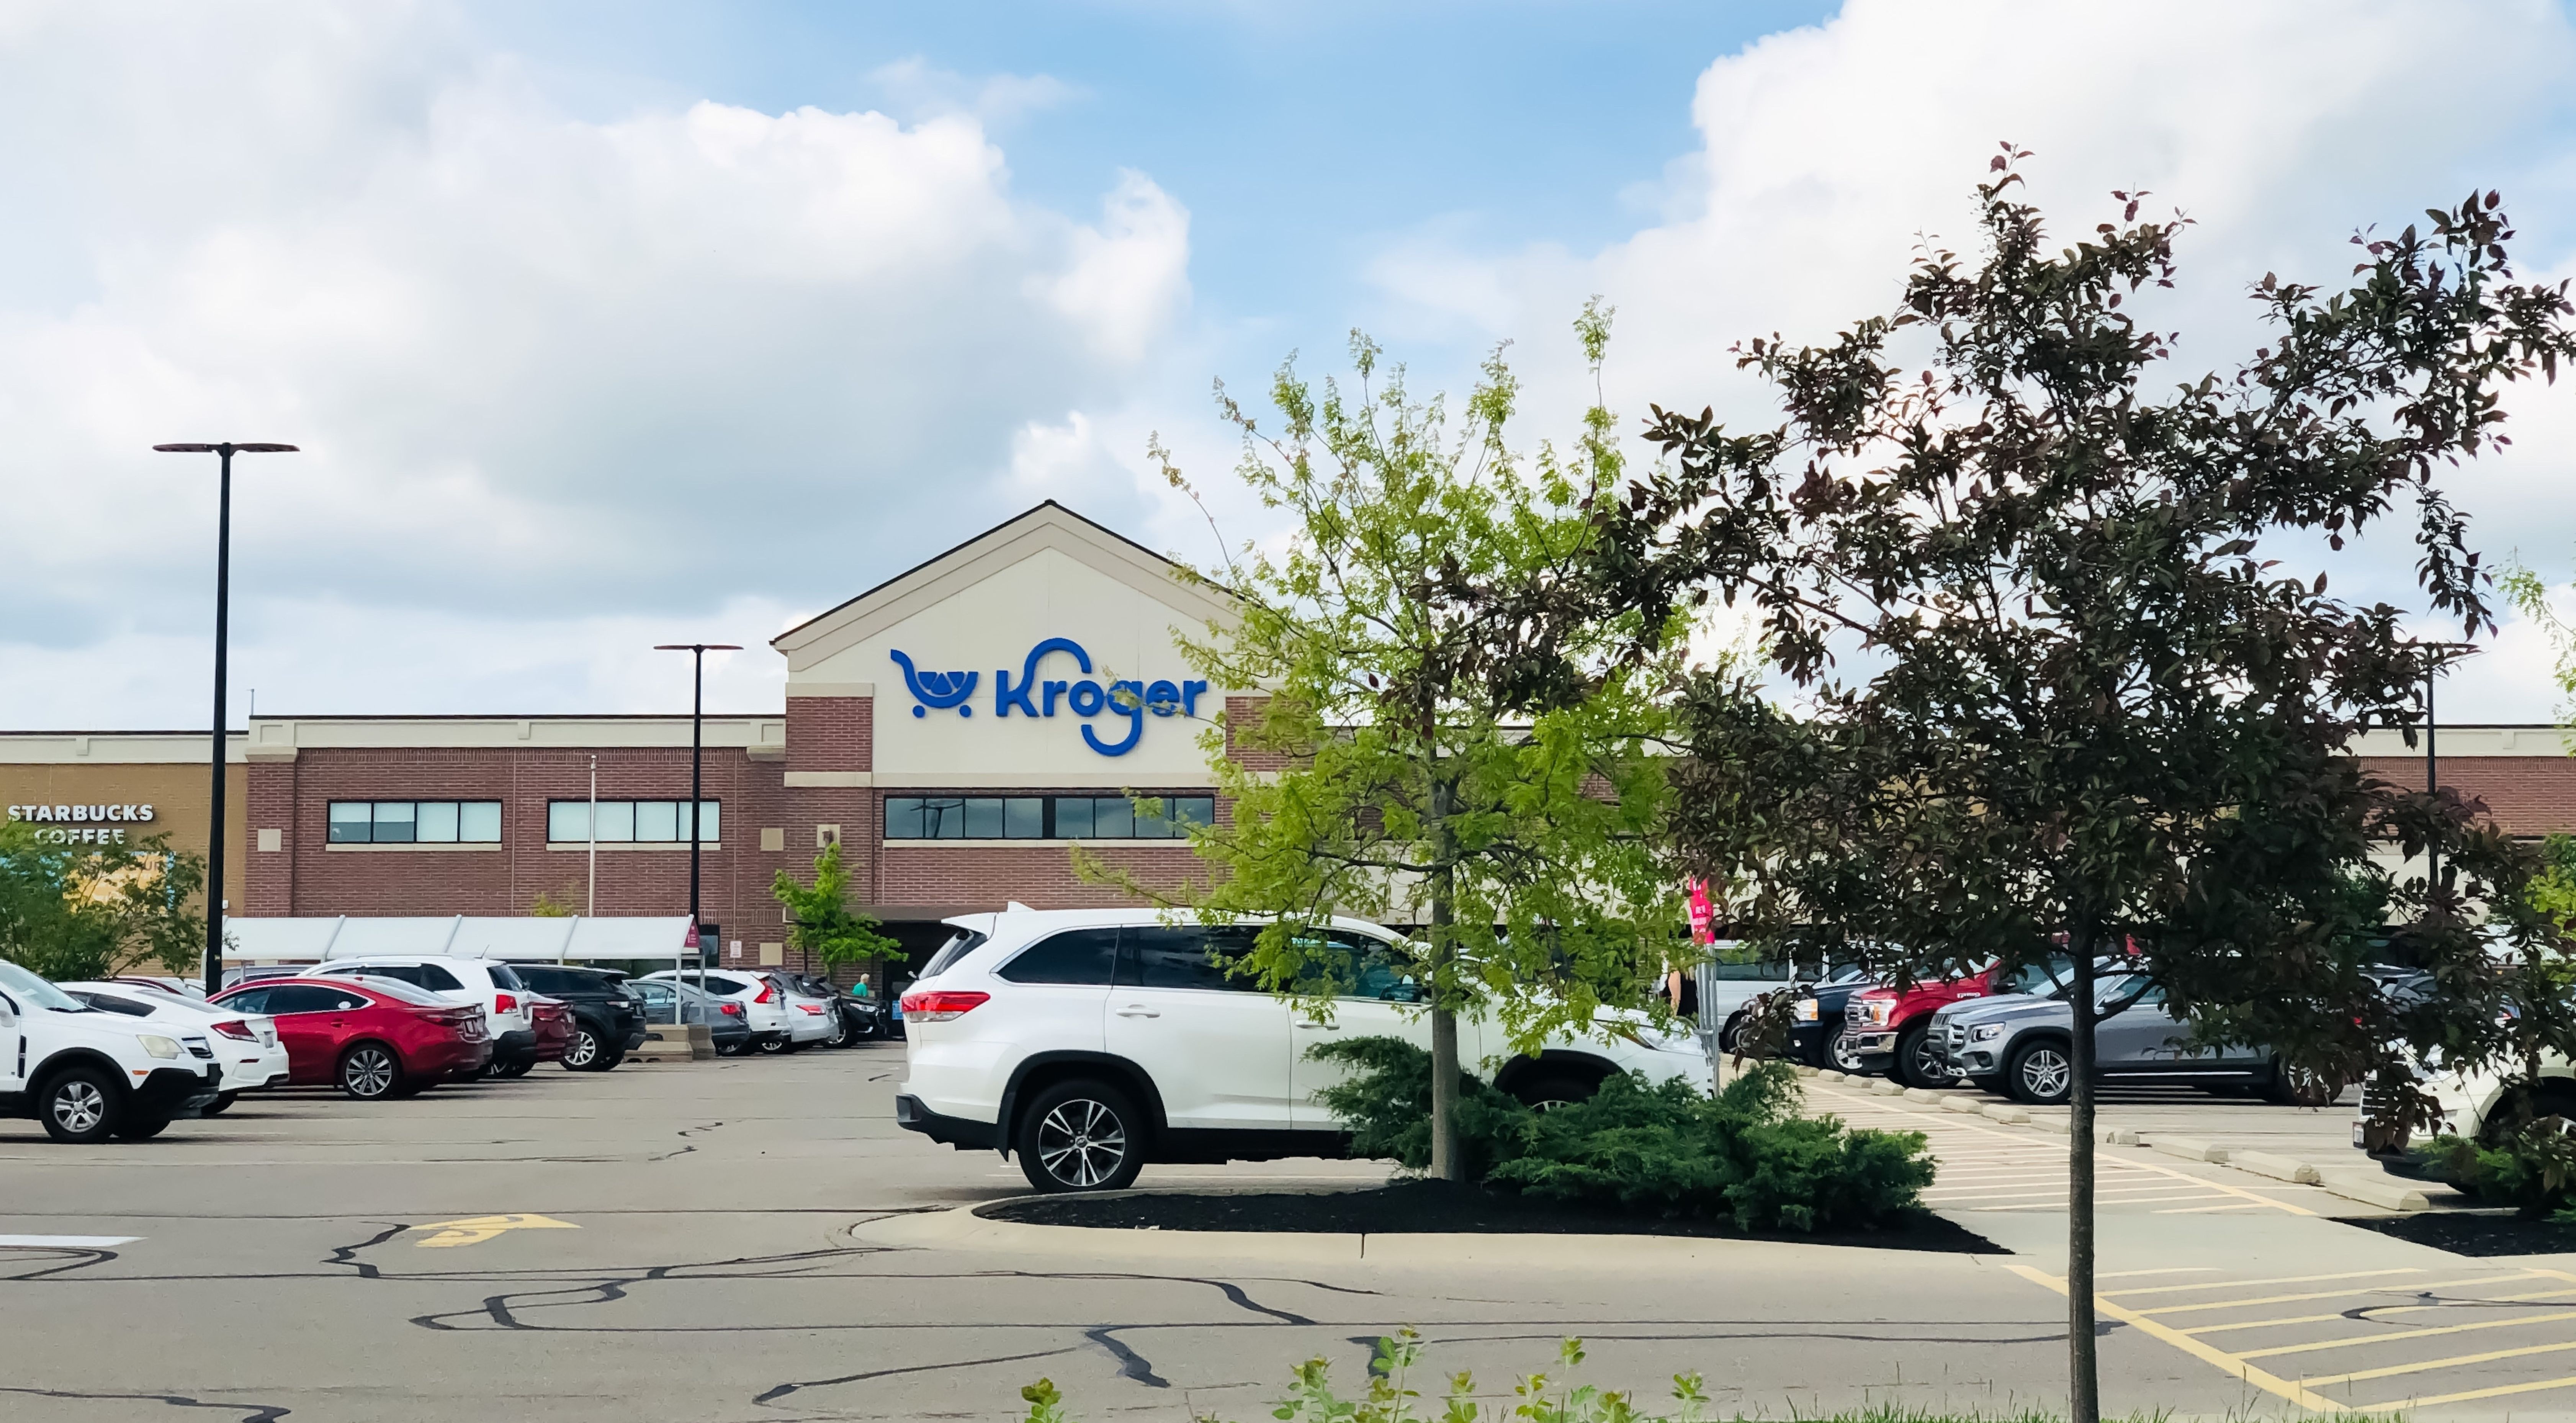 Exterior and parking lot of a nearby Kroger grocery store